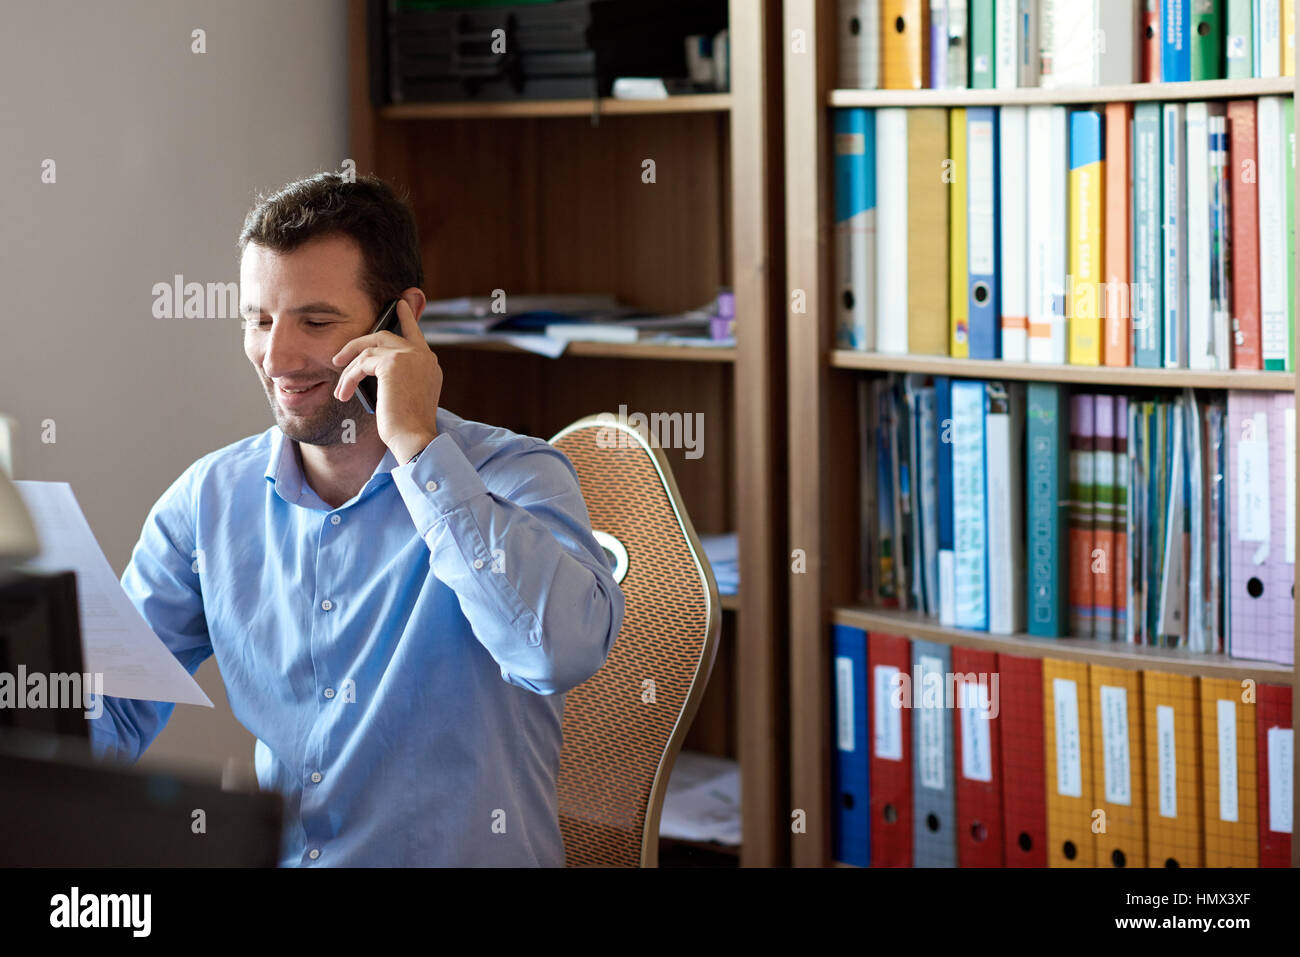 Entrepreneur discussing business on the phone in an office Stock Photo